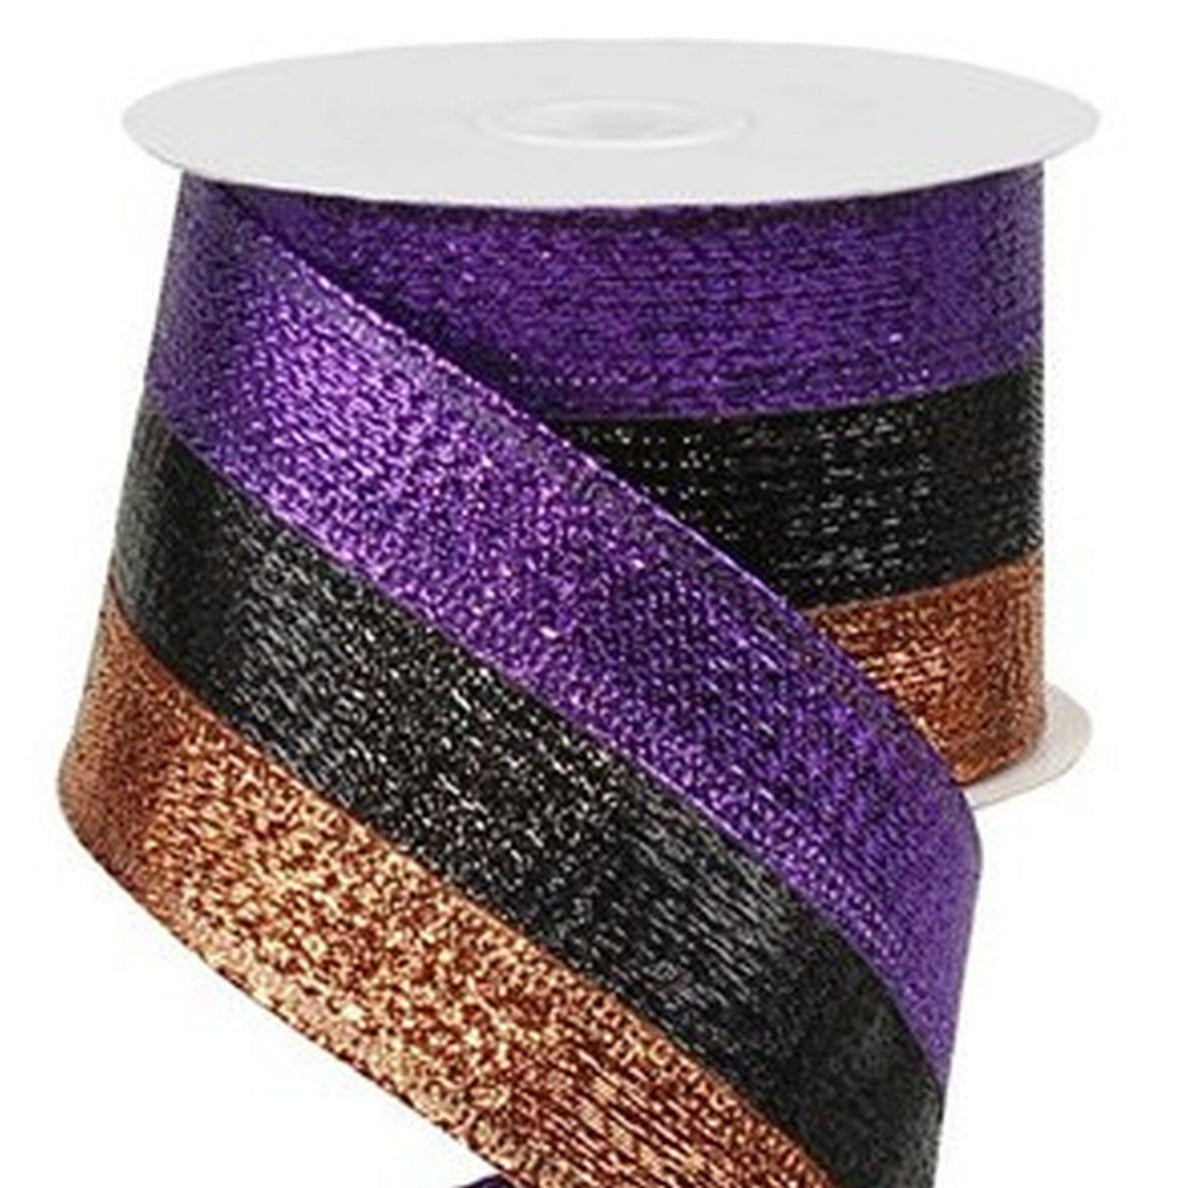 Glitter Striped Mardi Gras Ribbon - 2 1/2 x 10 Yards, Wired Edge,  Sparkling Purple, Green & Gold, Christmas, Wreath, Bows, Easter 